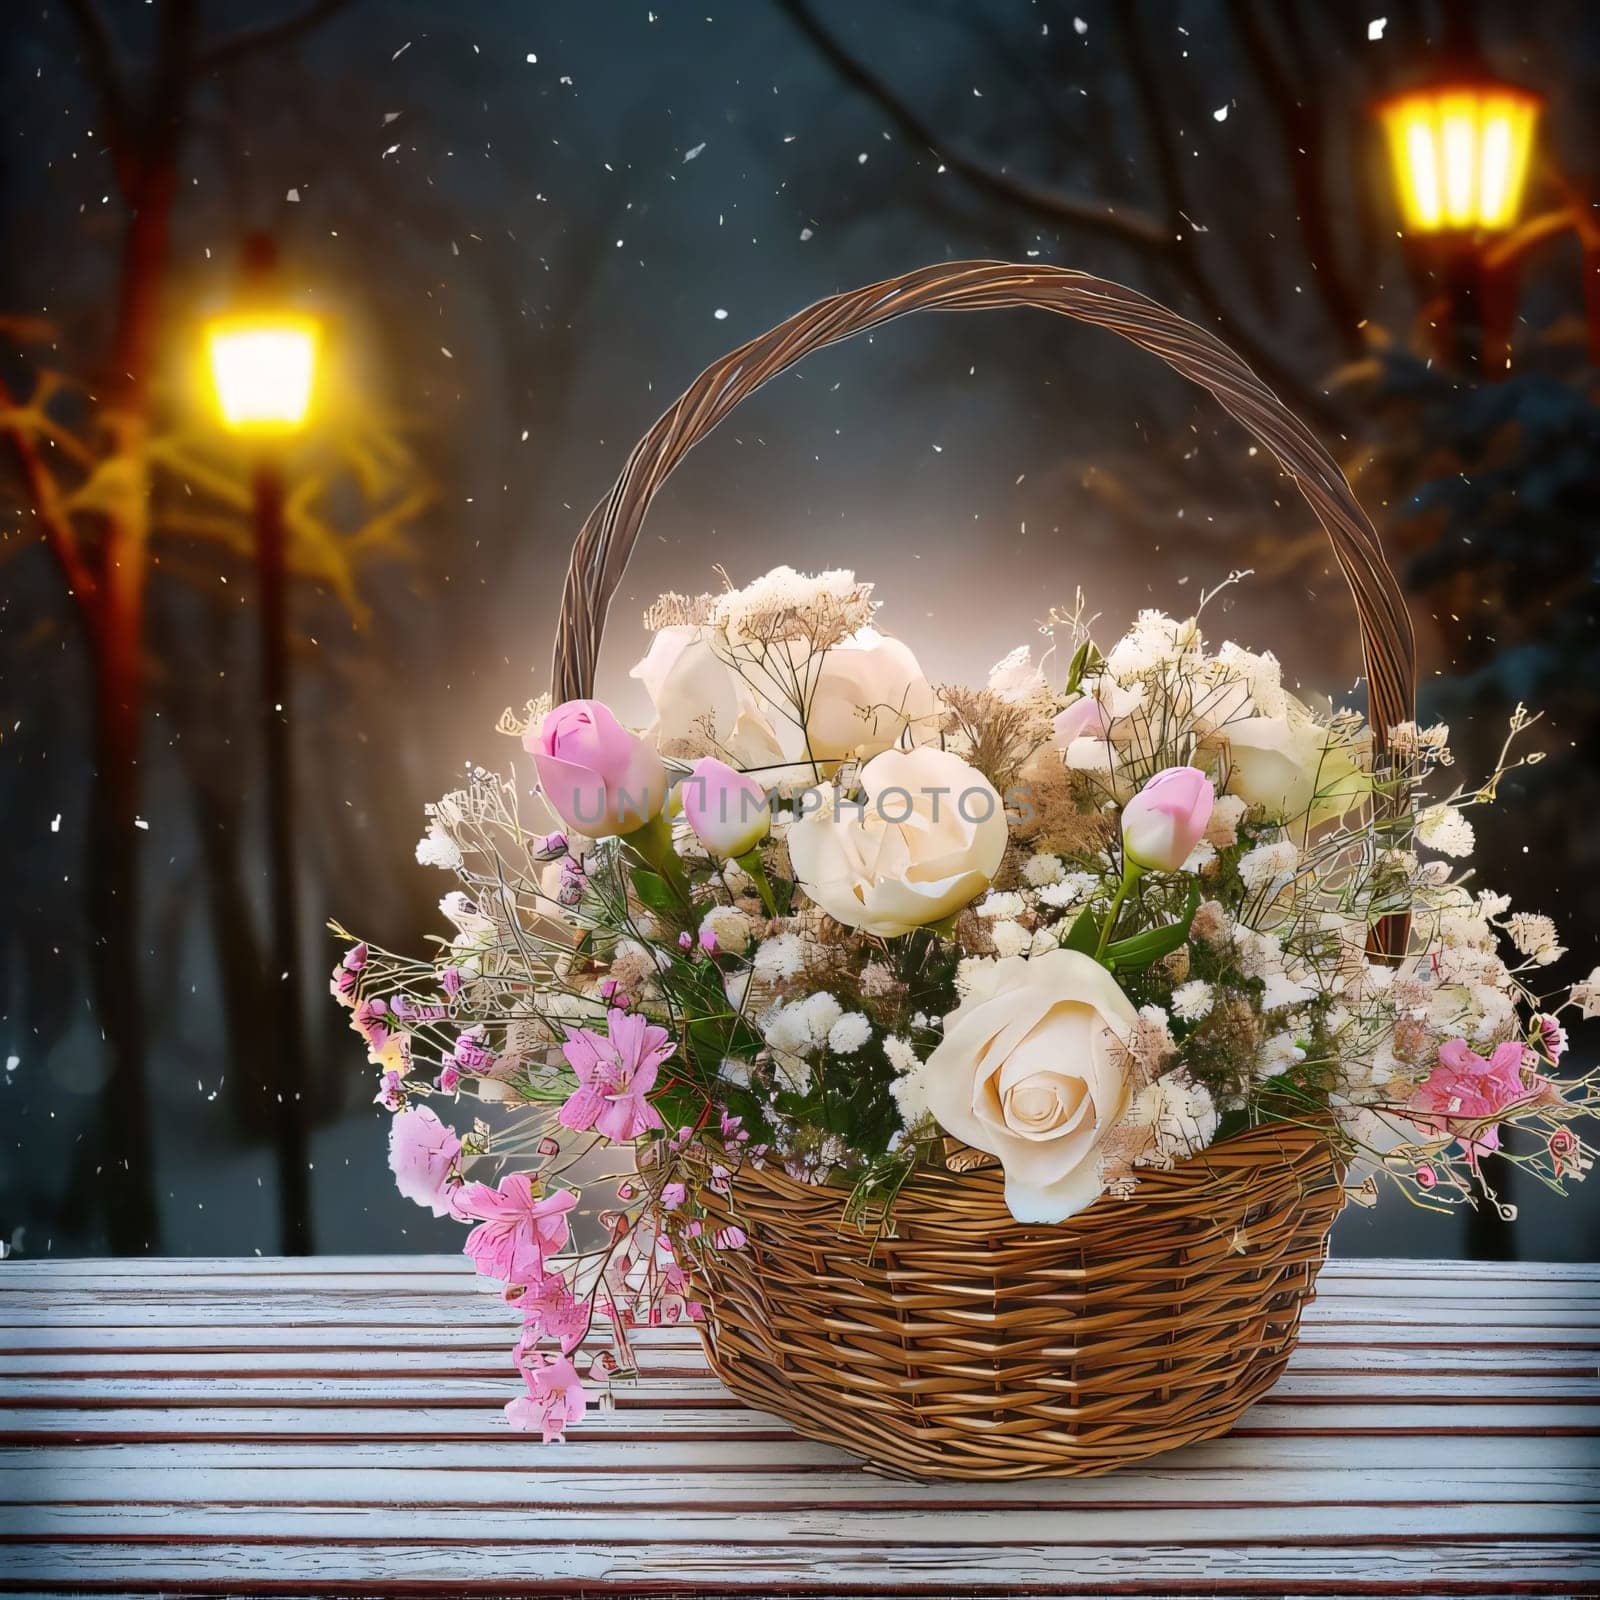 Illustration, wicker basket full of white and pink flowers. Flowering flowers, a symbol of spring, new life. A joyful time of nature waking up to life.